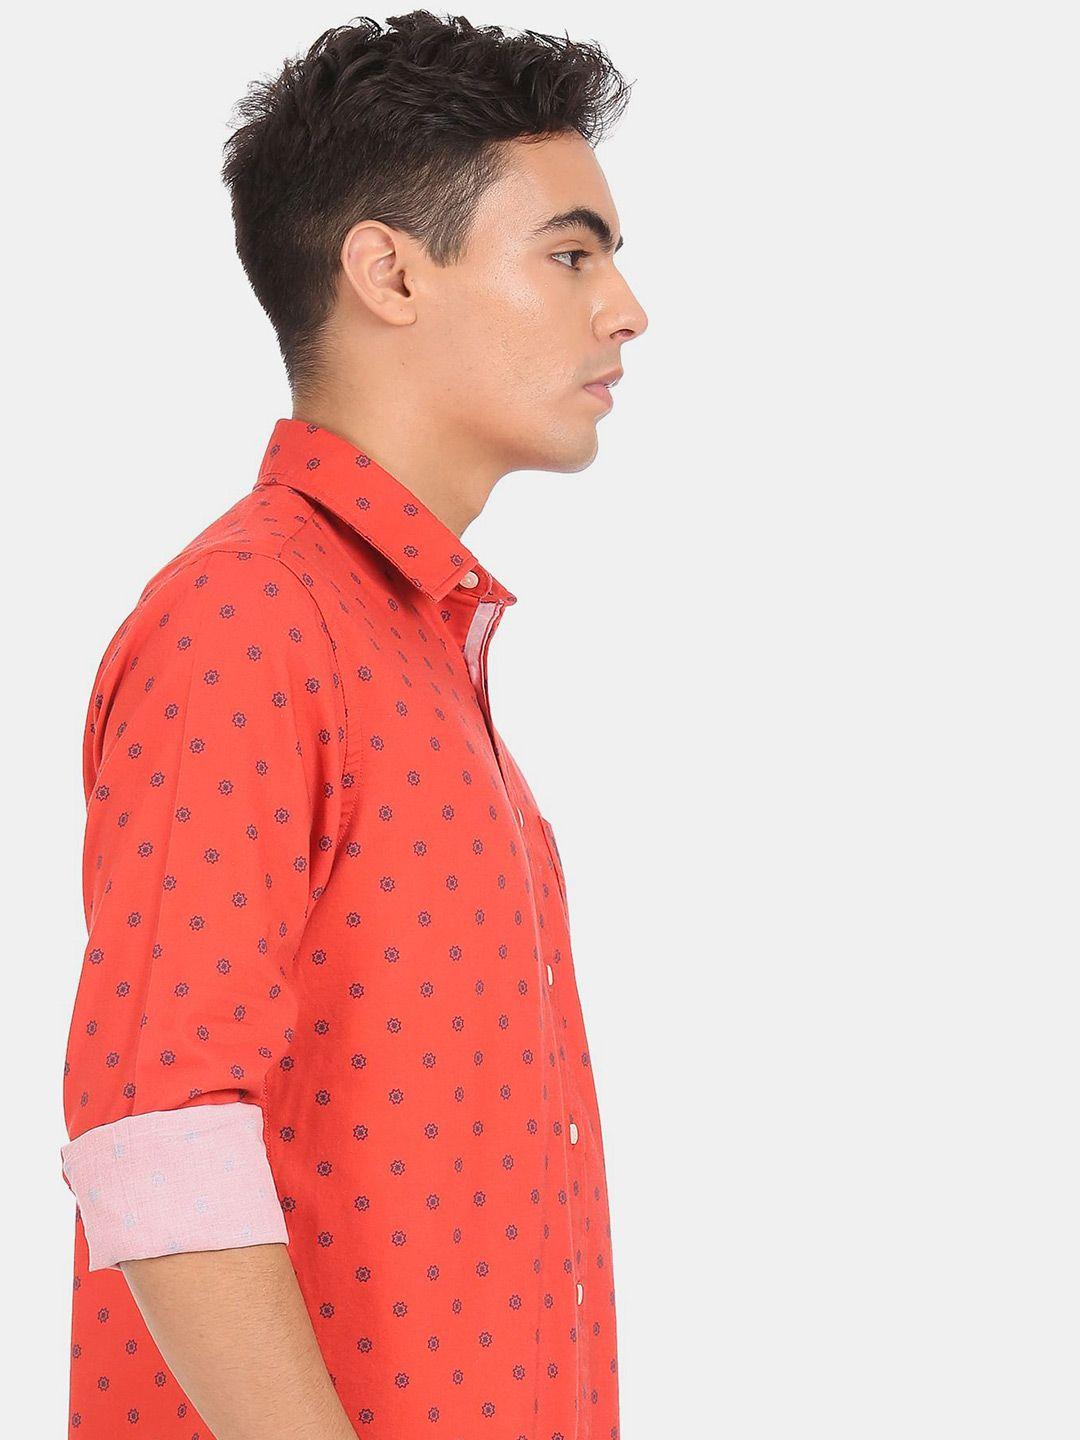 u s polo assn men red floral printed casual shirt